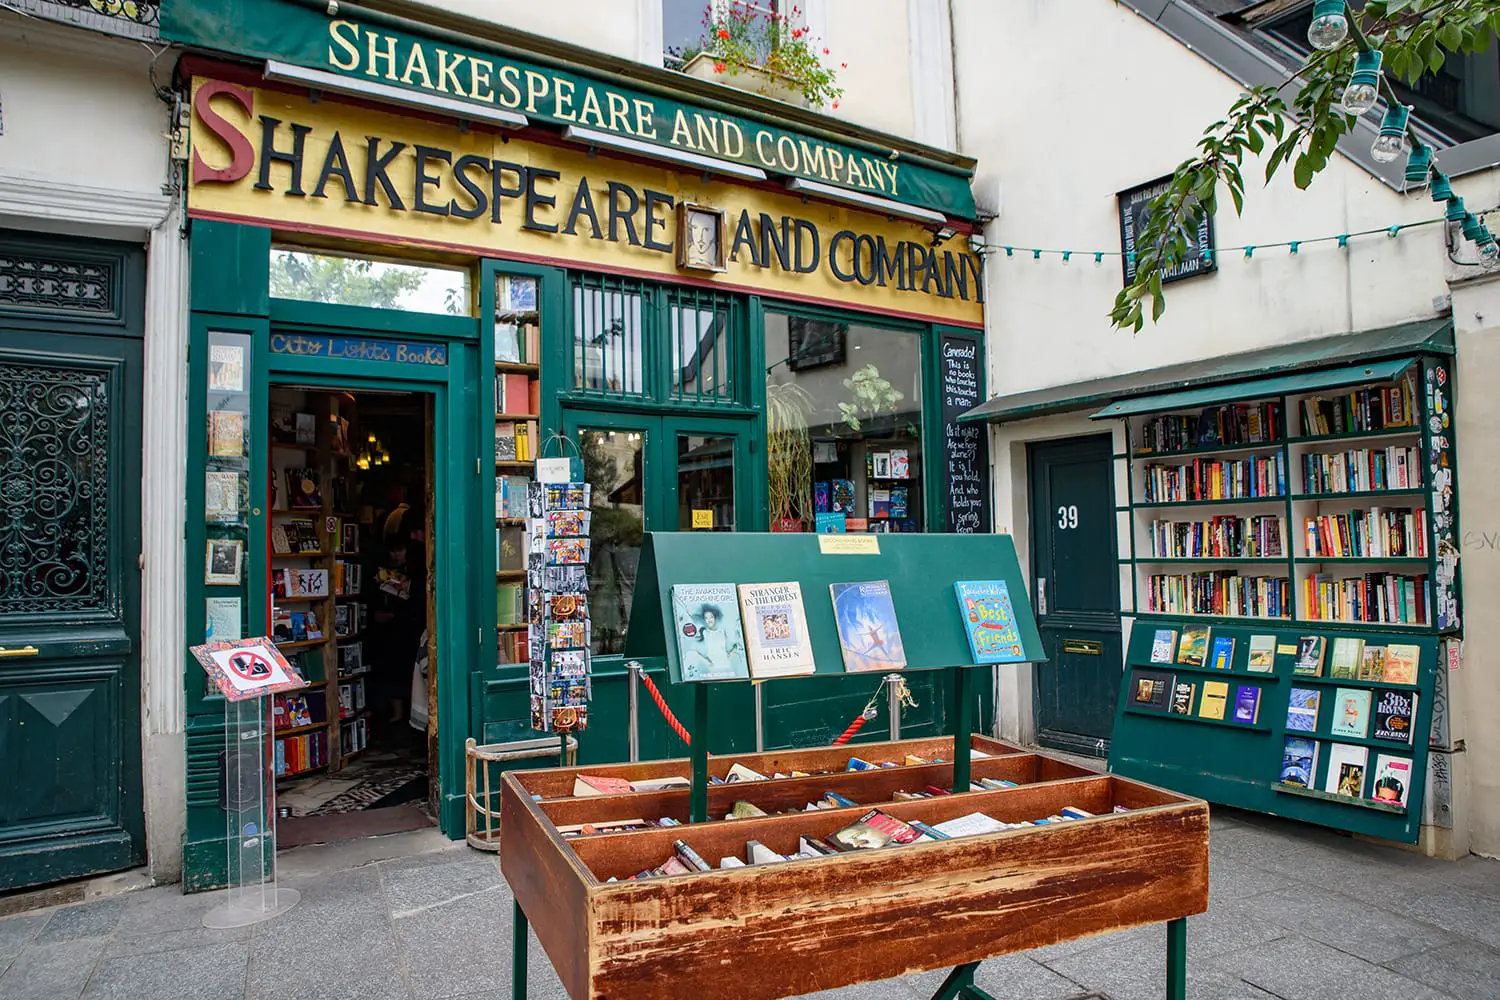 Shakespeare and Company, the famous English-language bookstores in Paris, France